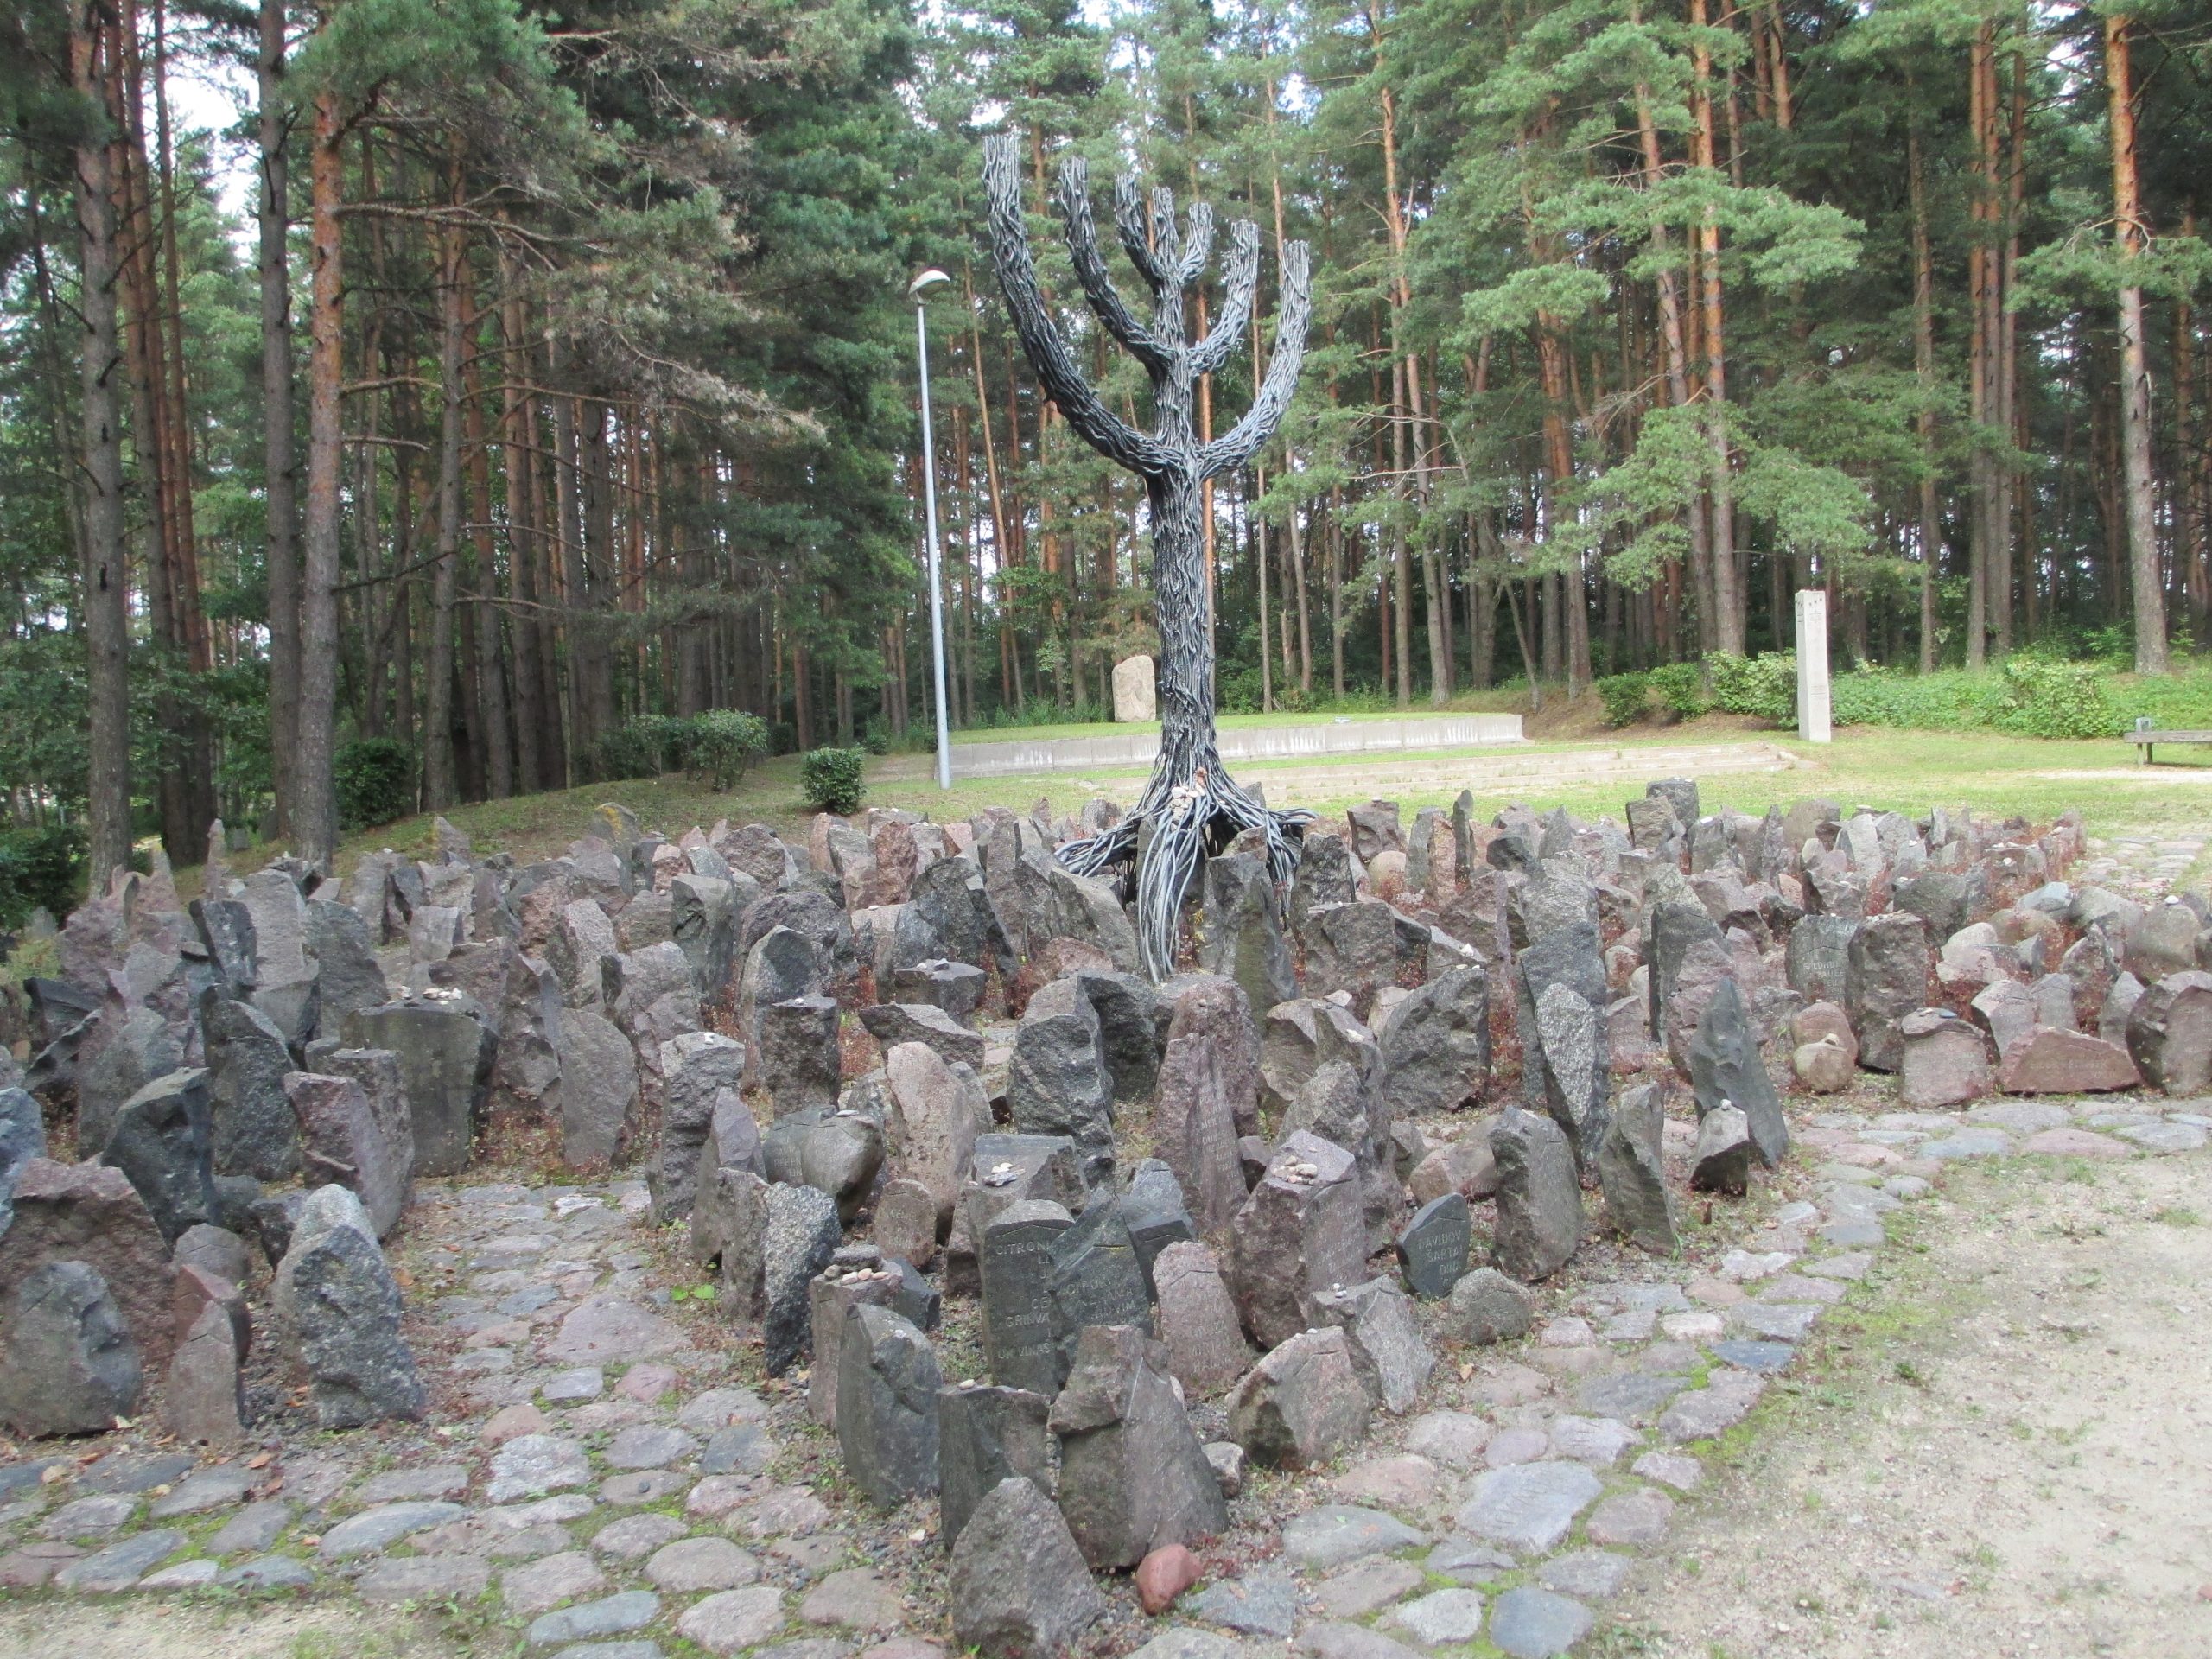 A memorial that looks like a pile of rocks surrounding a tree